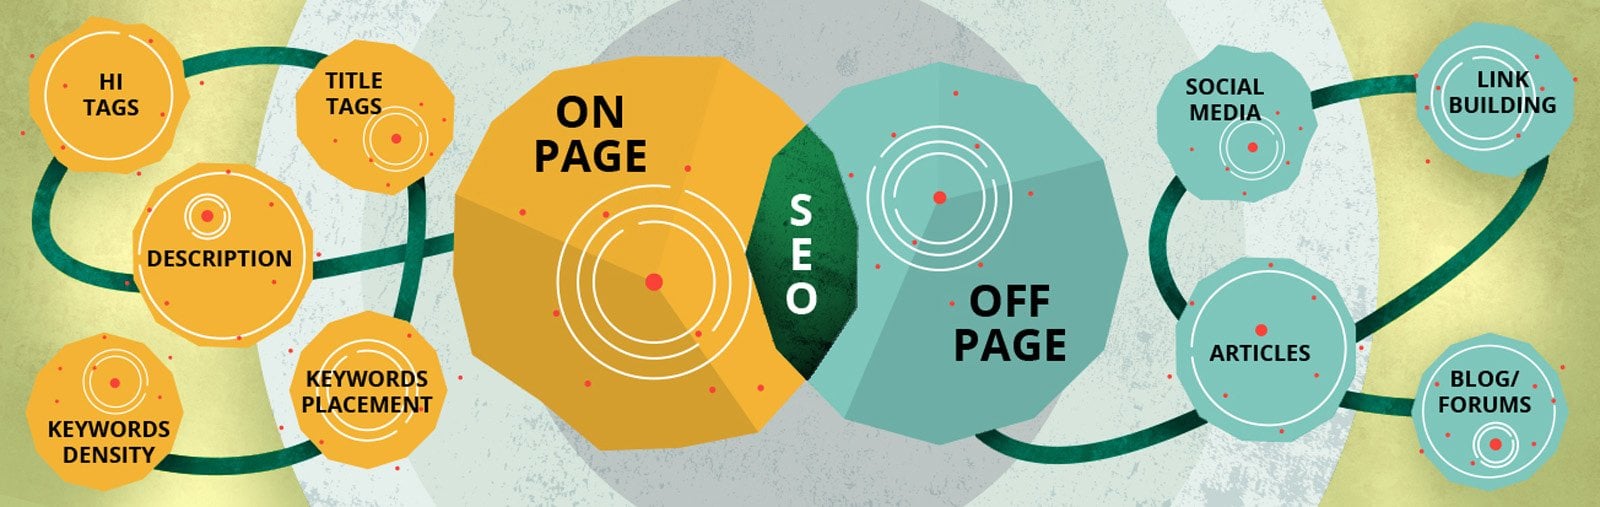 seo on page e off page